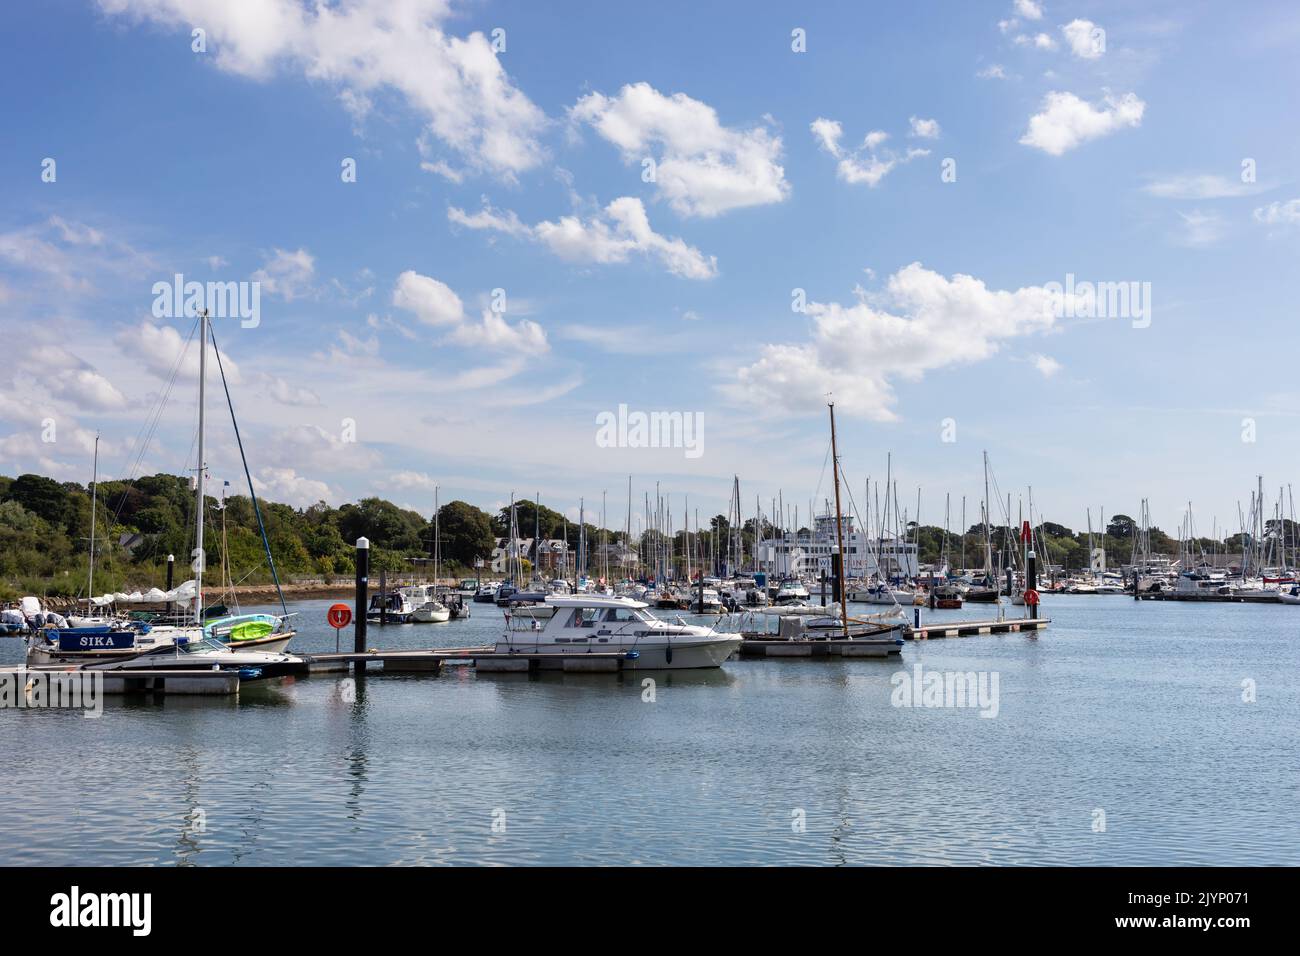 Boats in Lymington Harbour, Hampshire, England Stock Photo